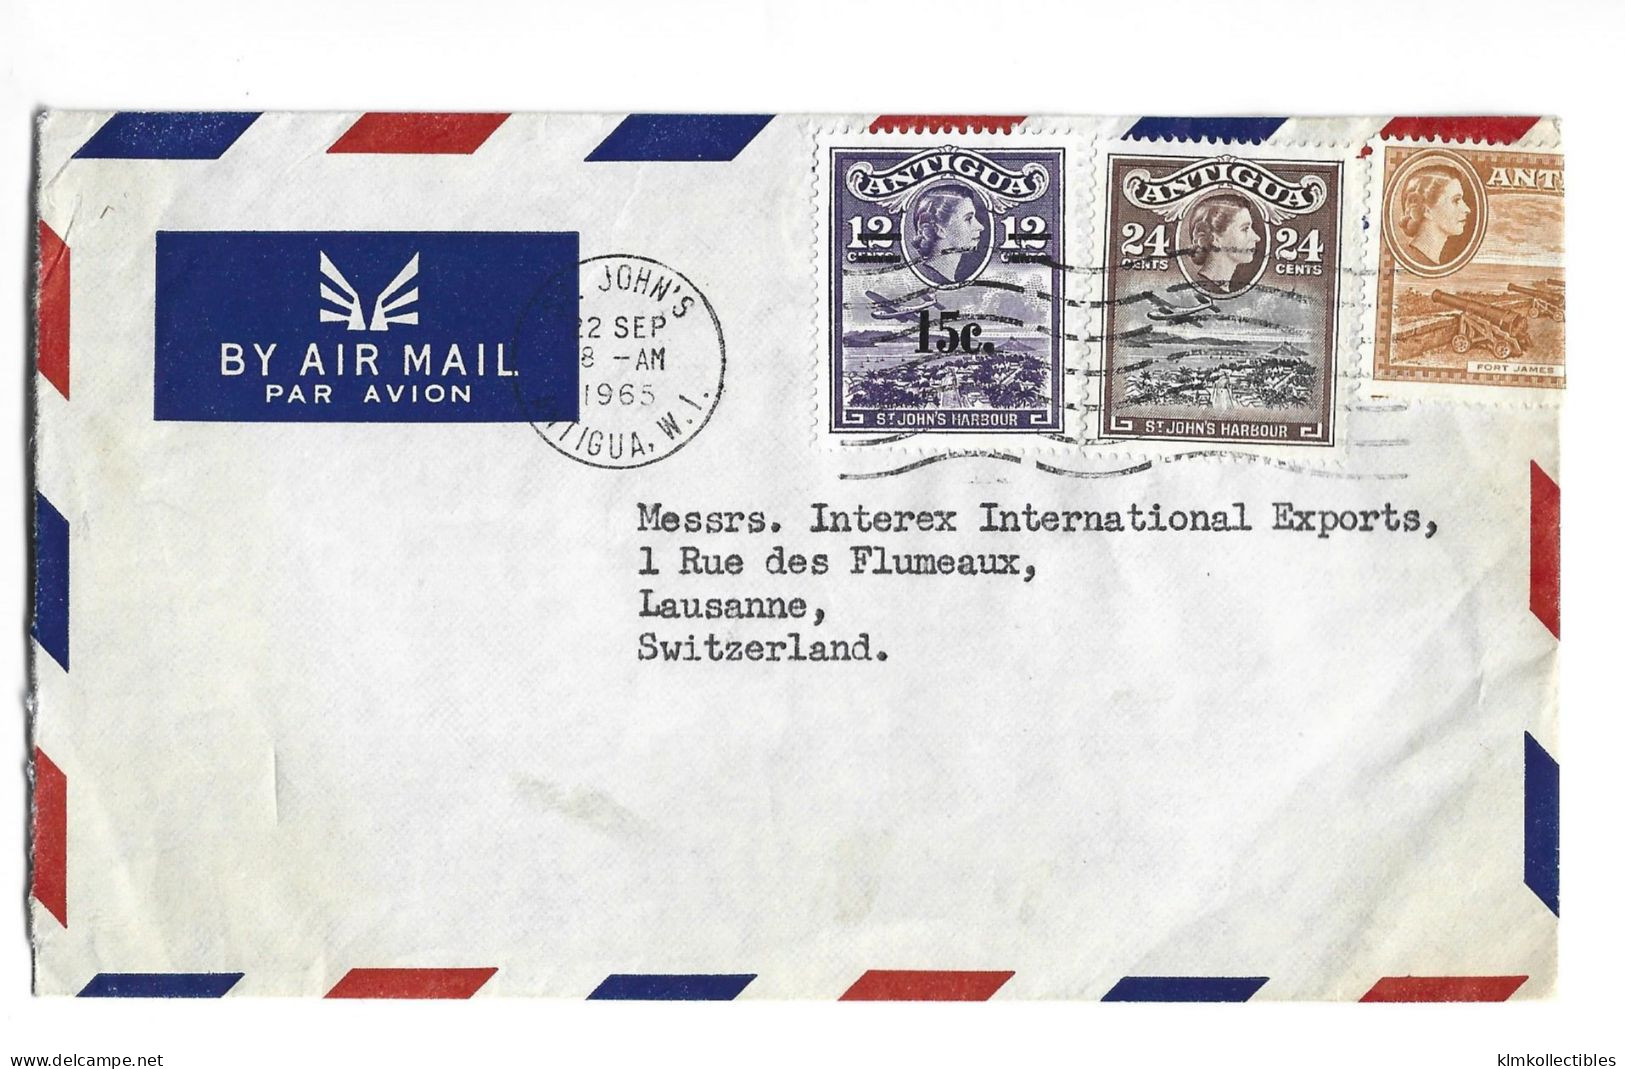 ANTIGUA & BARBUDA - 1965 AIRMAIL COVER TO SWITZERLAND - 1960-1981 Ministerial Government